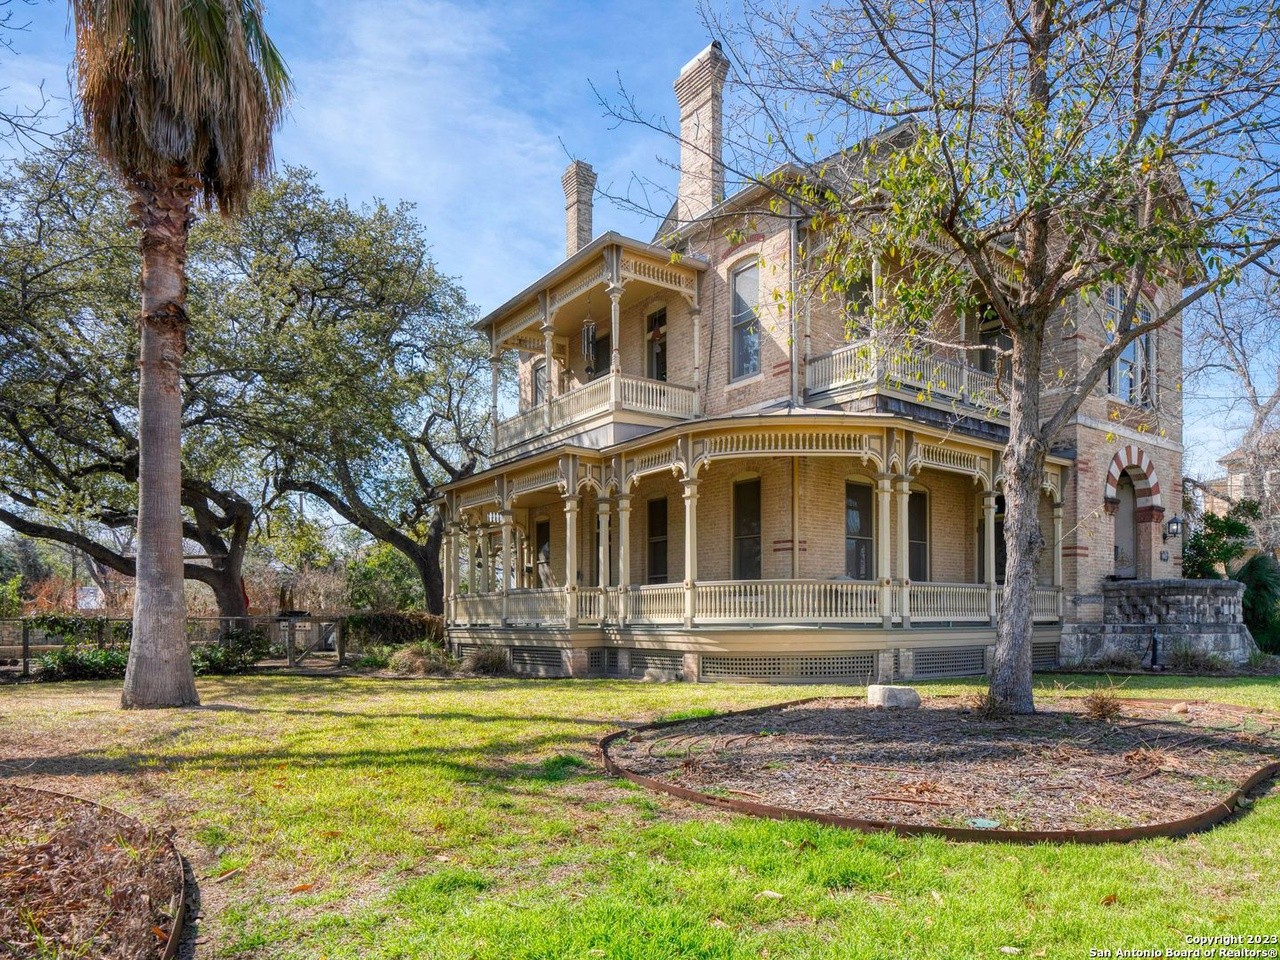 A historical San Antonio home designed by Lone Star Brewery's architect is now for sale